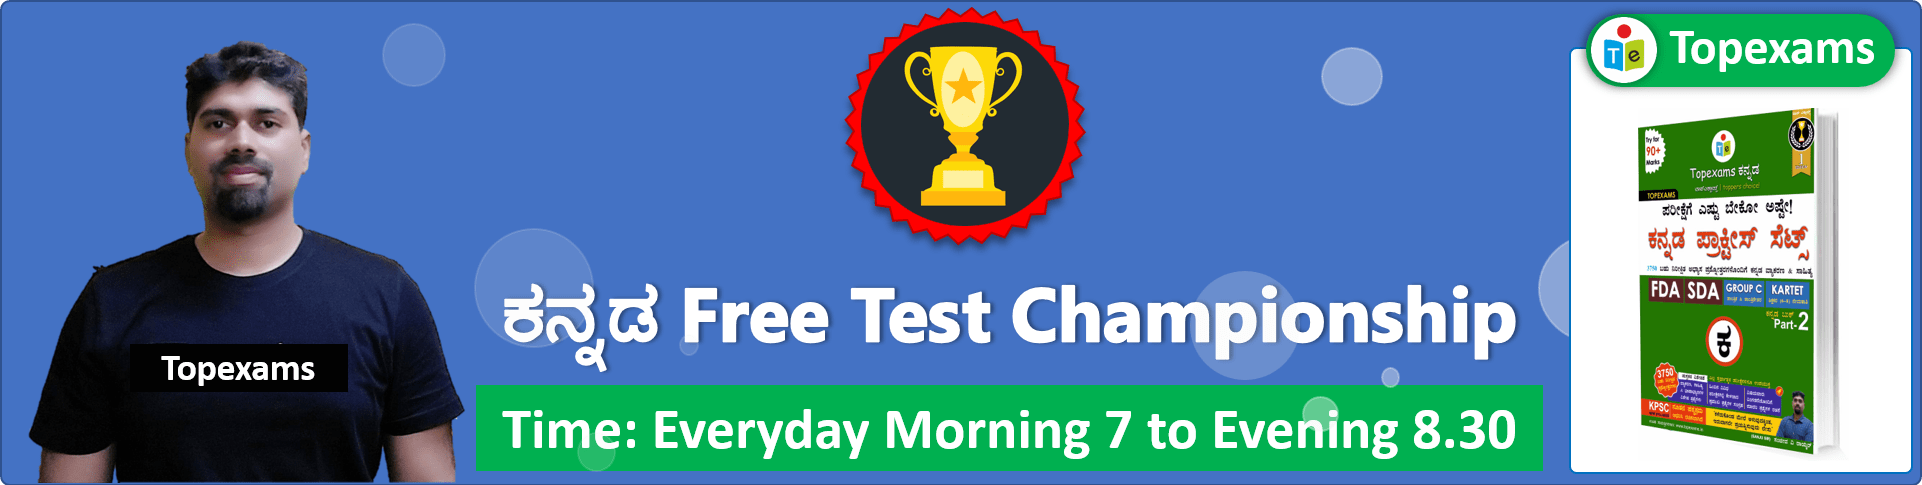 You are currently viewing Test-9 ಕನ್ನಡ Championship  For SDA, FDA, Group C, KARTET